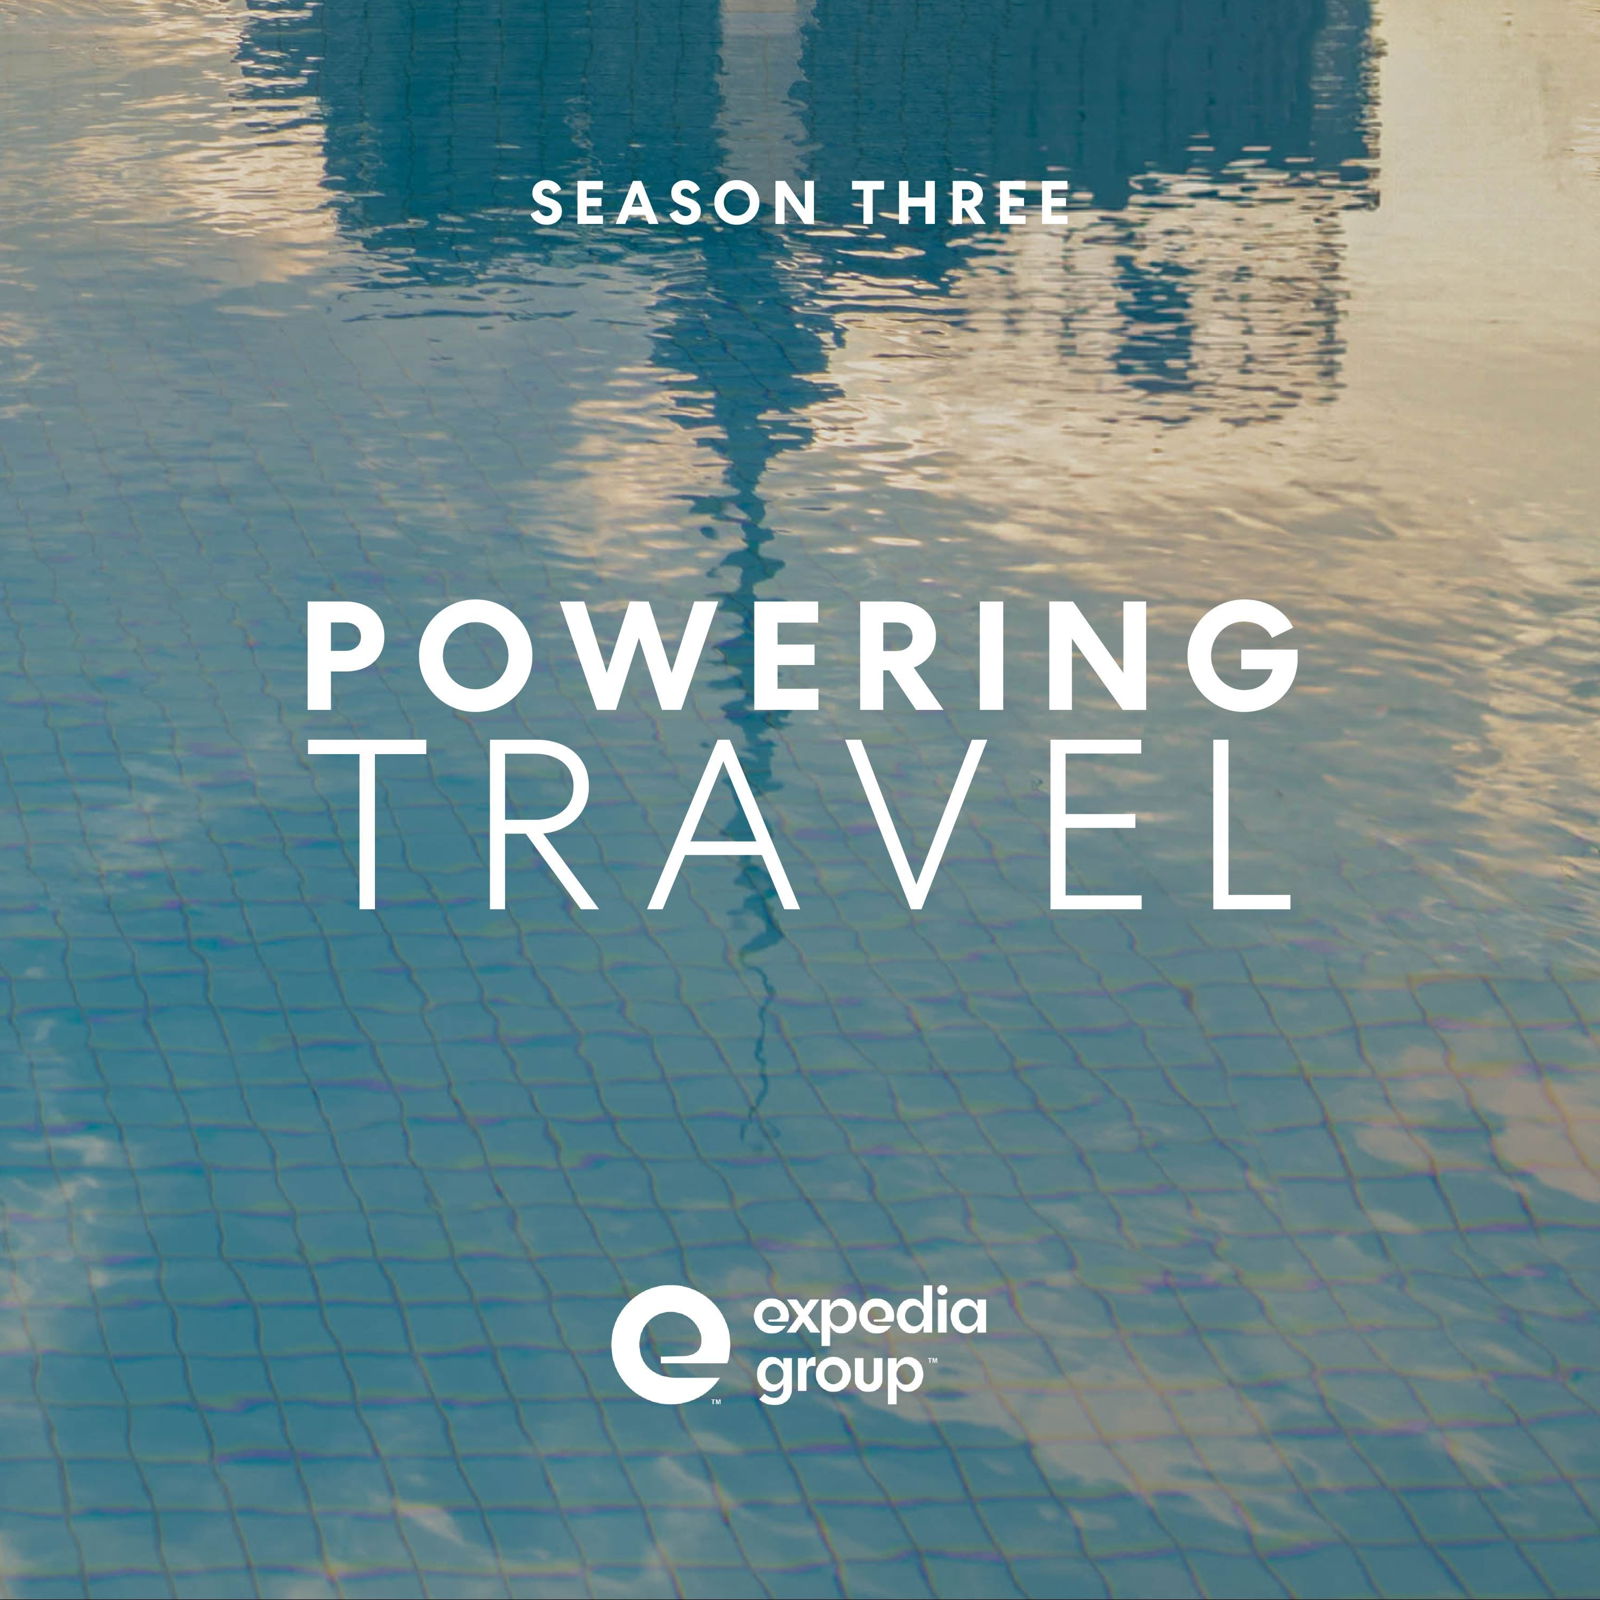 From inspiration to booking: How travelers purchase